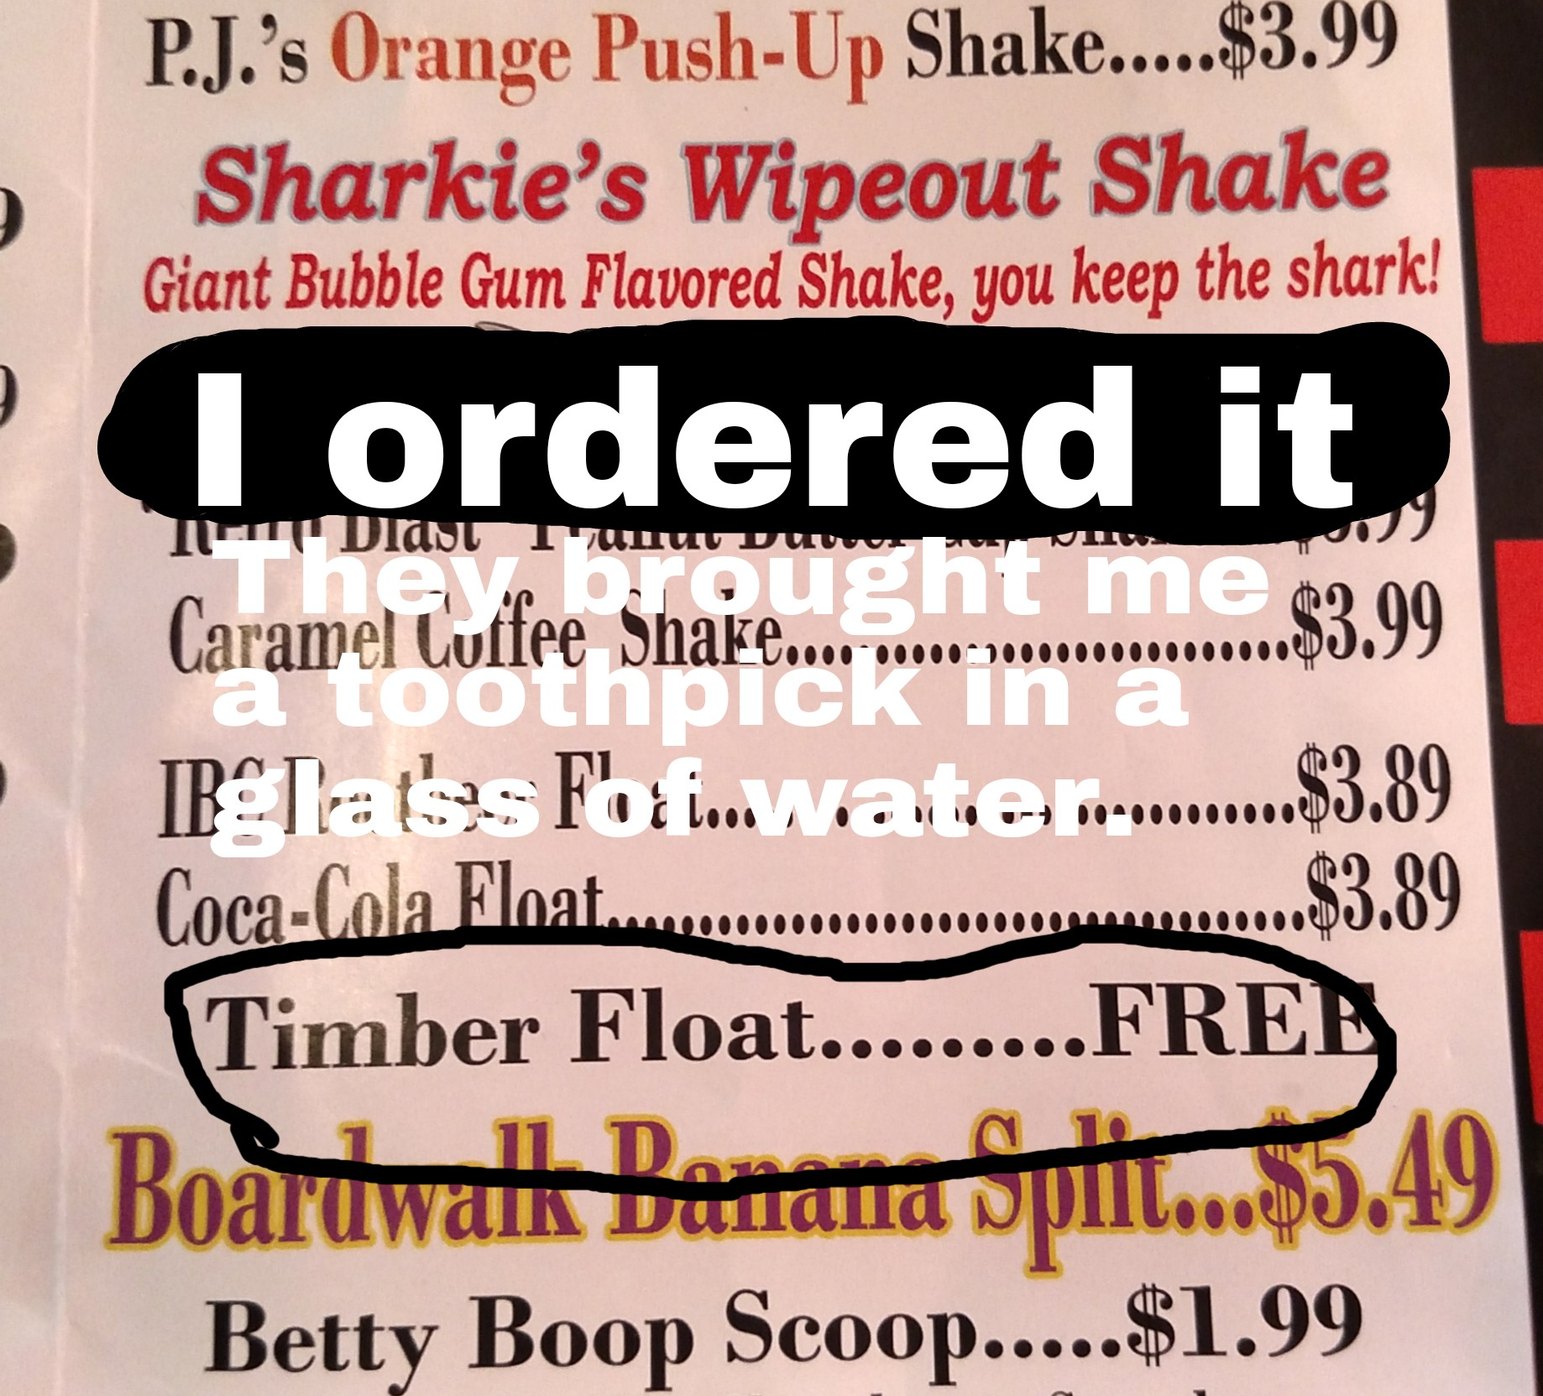 Timber Float. Get yours today at Yesterday's Diner - meme